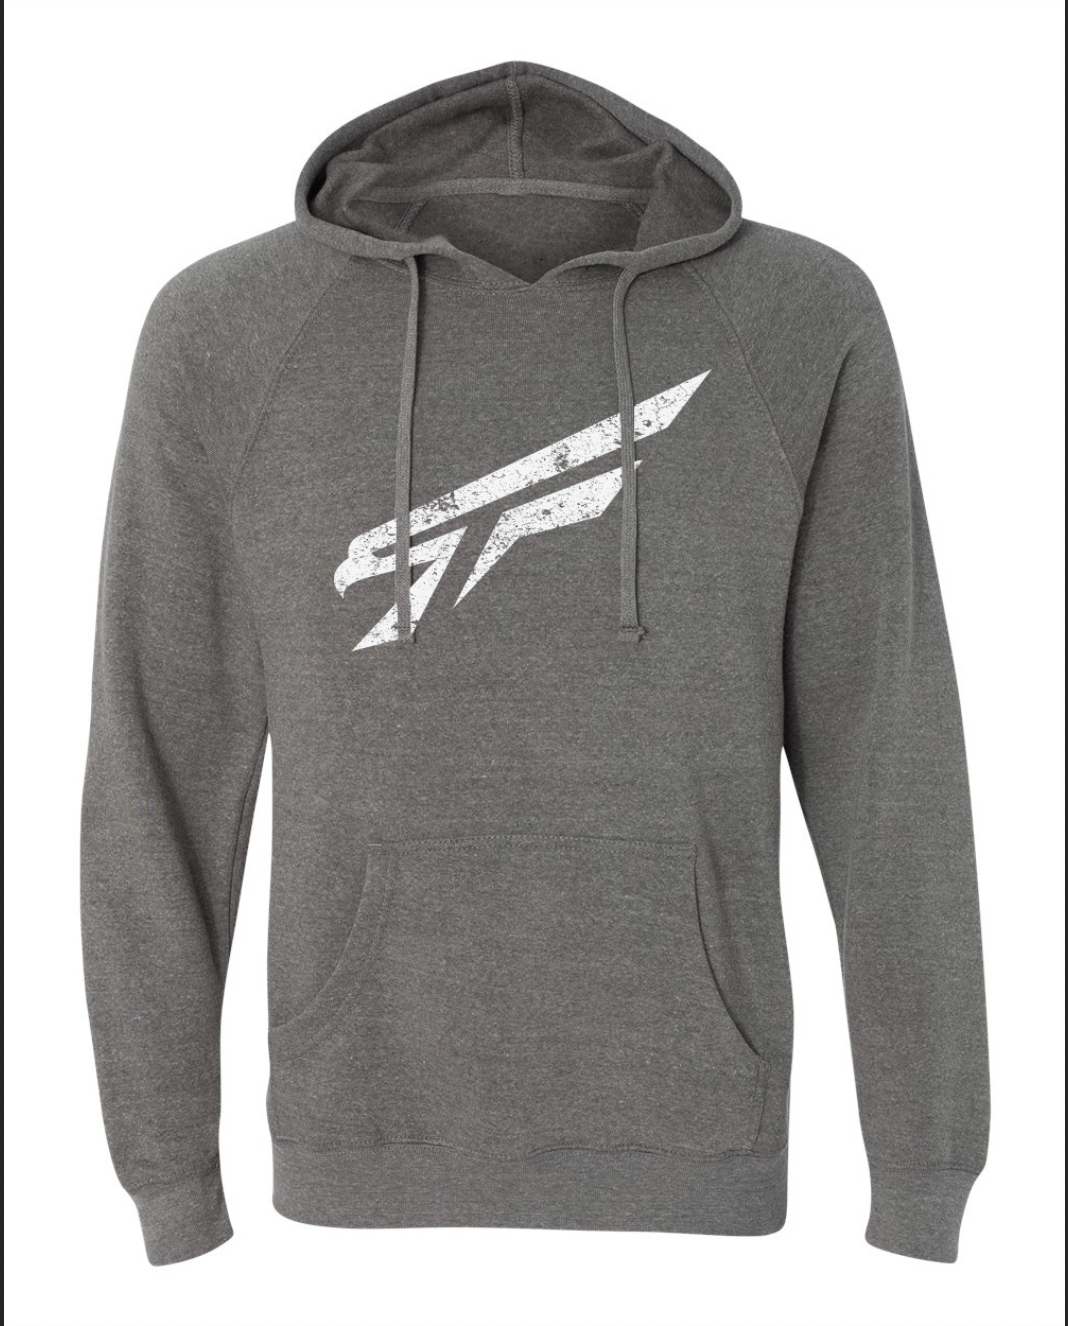 Full Front TF Logo Full Front Hoodie 8 oz. 52/48 cotton/polyester blend